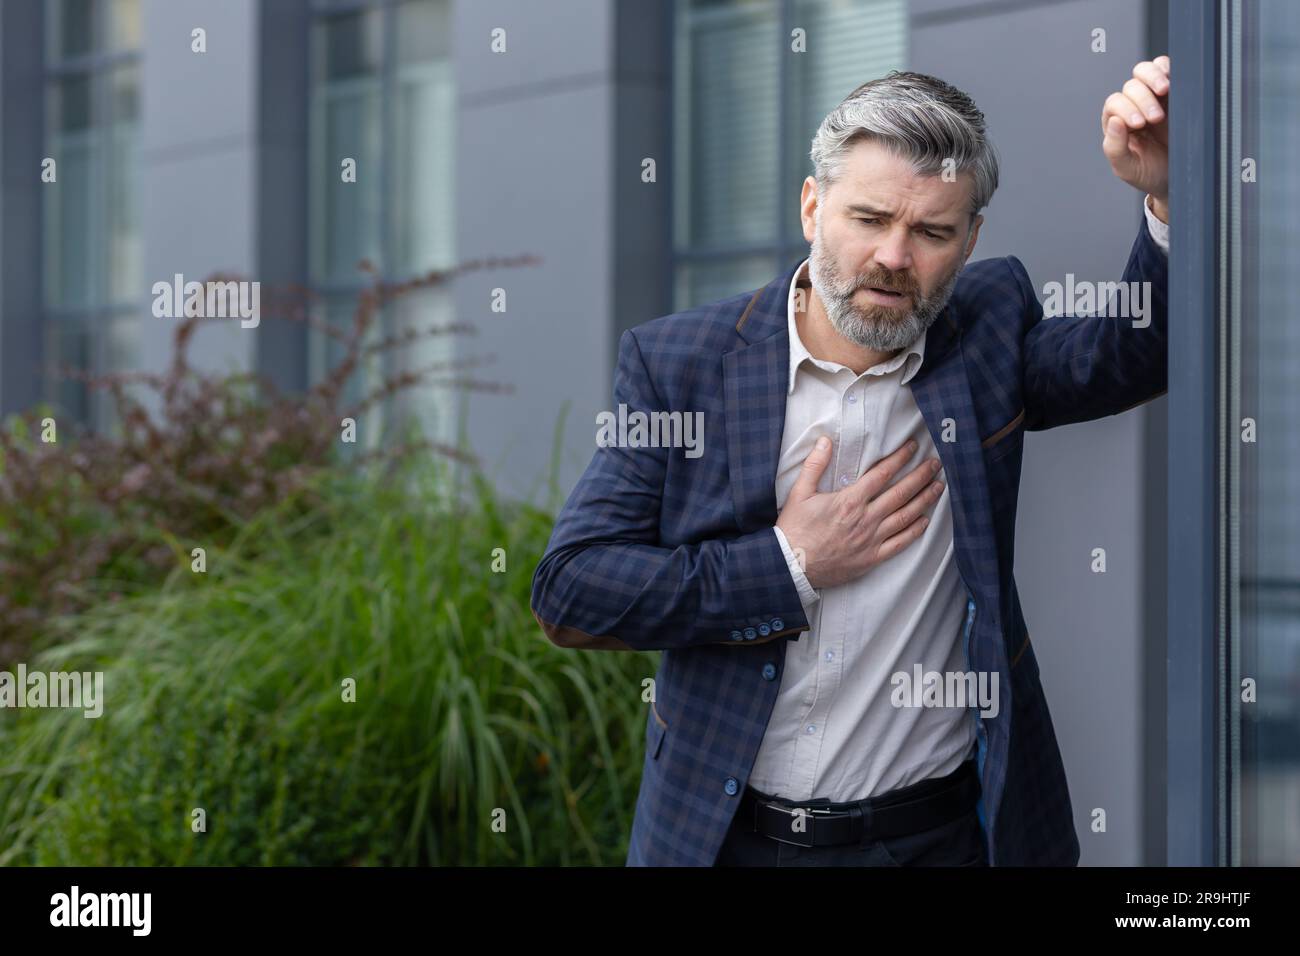 Heart attack and chest pain, mature gray-haired man outside office building has severe pain, businessman boss holding hand to chest and breathing hard from pain. Stock Photo